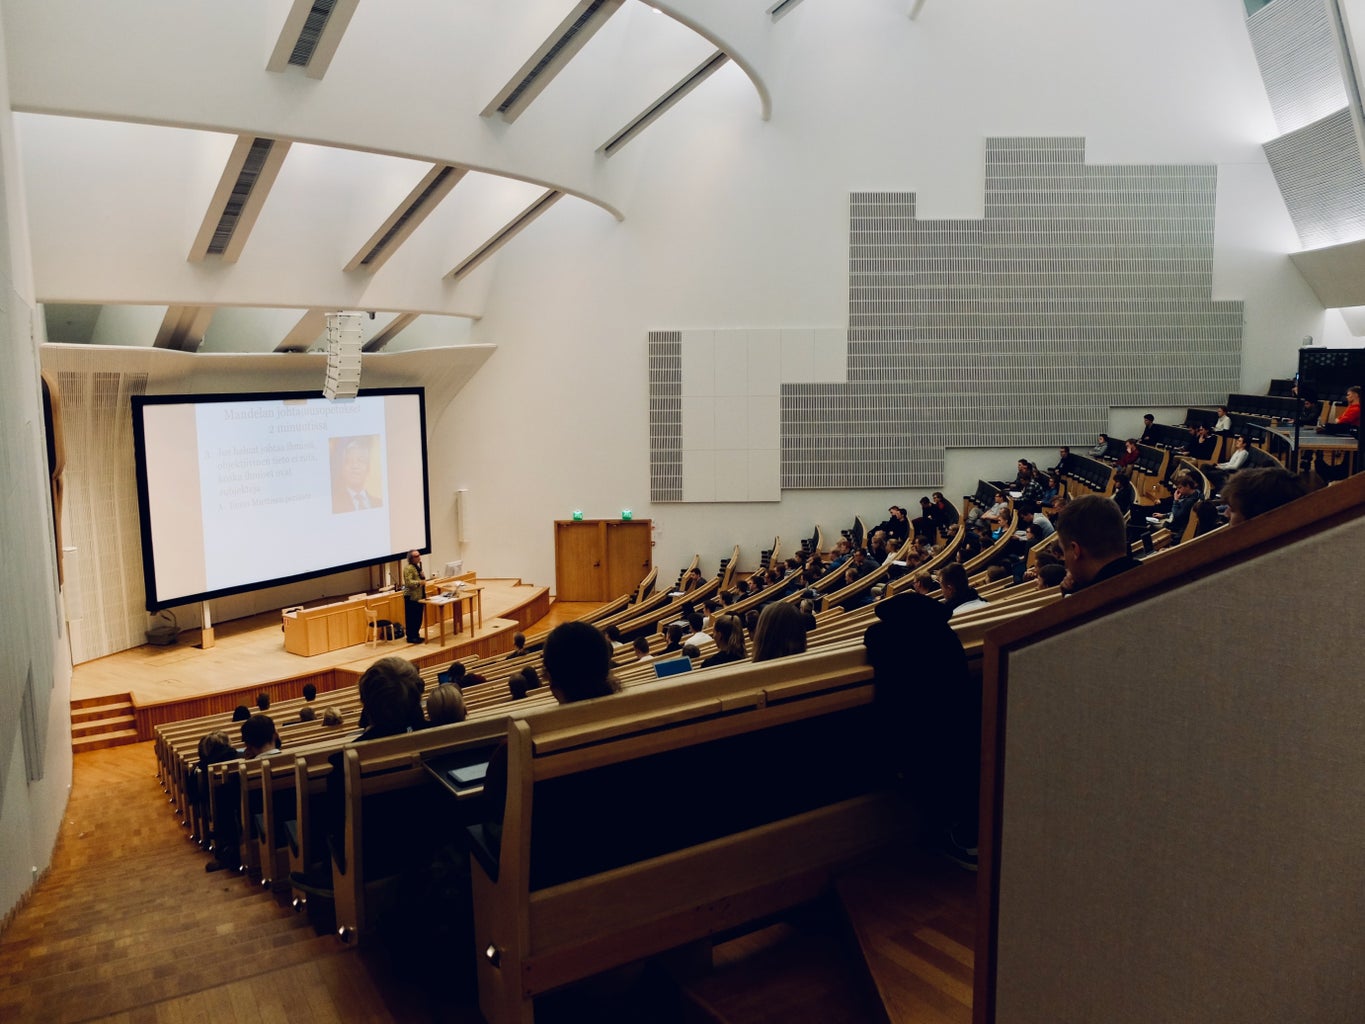 Students in class in a college lecture hall at Aalto University in Espoo, Finland.